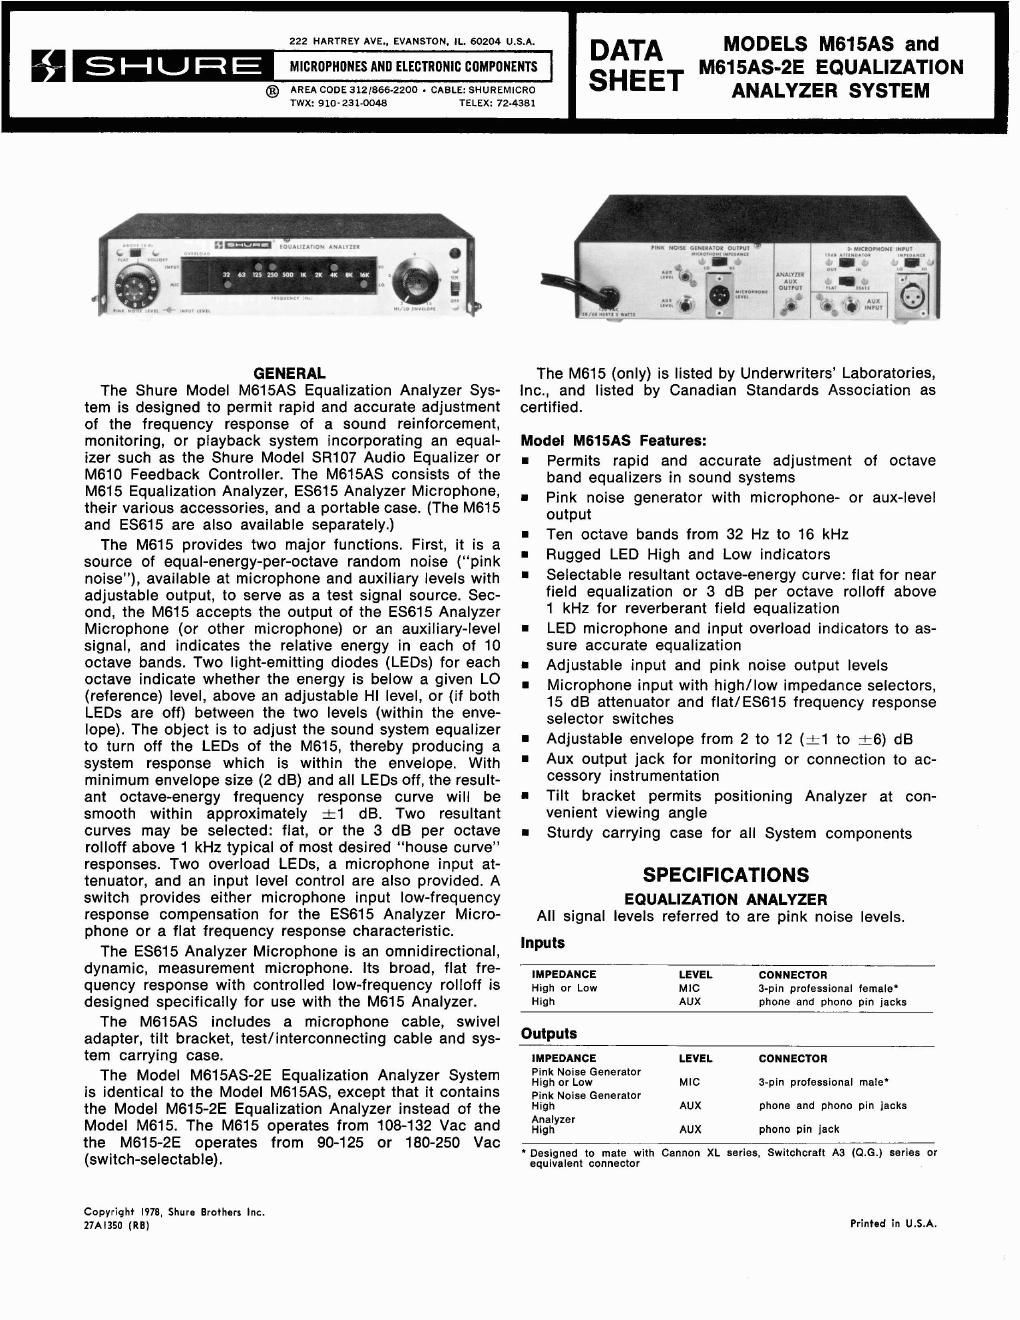 shure m615as owners manual